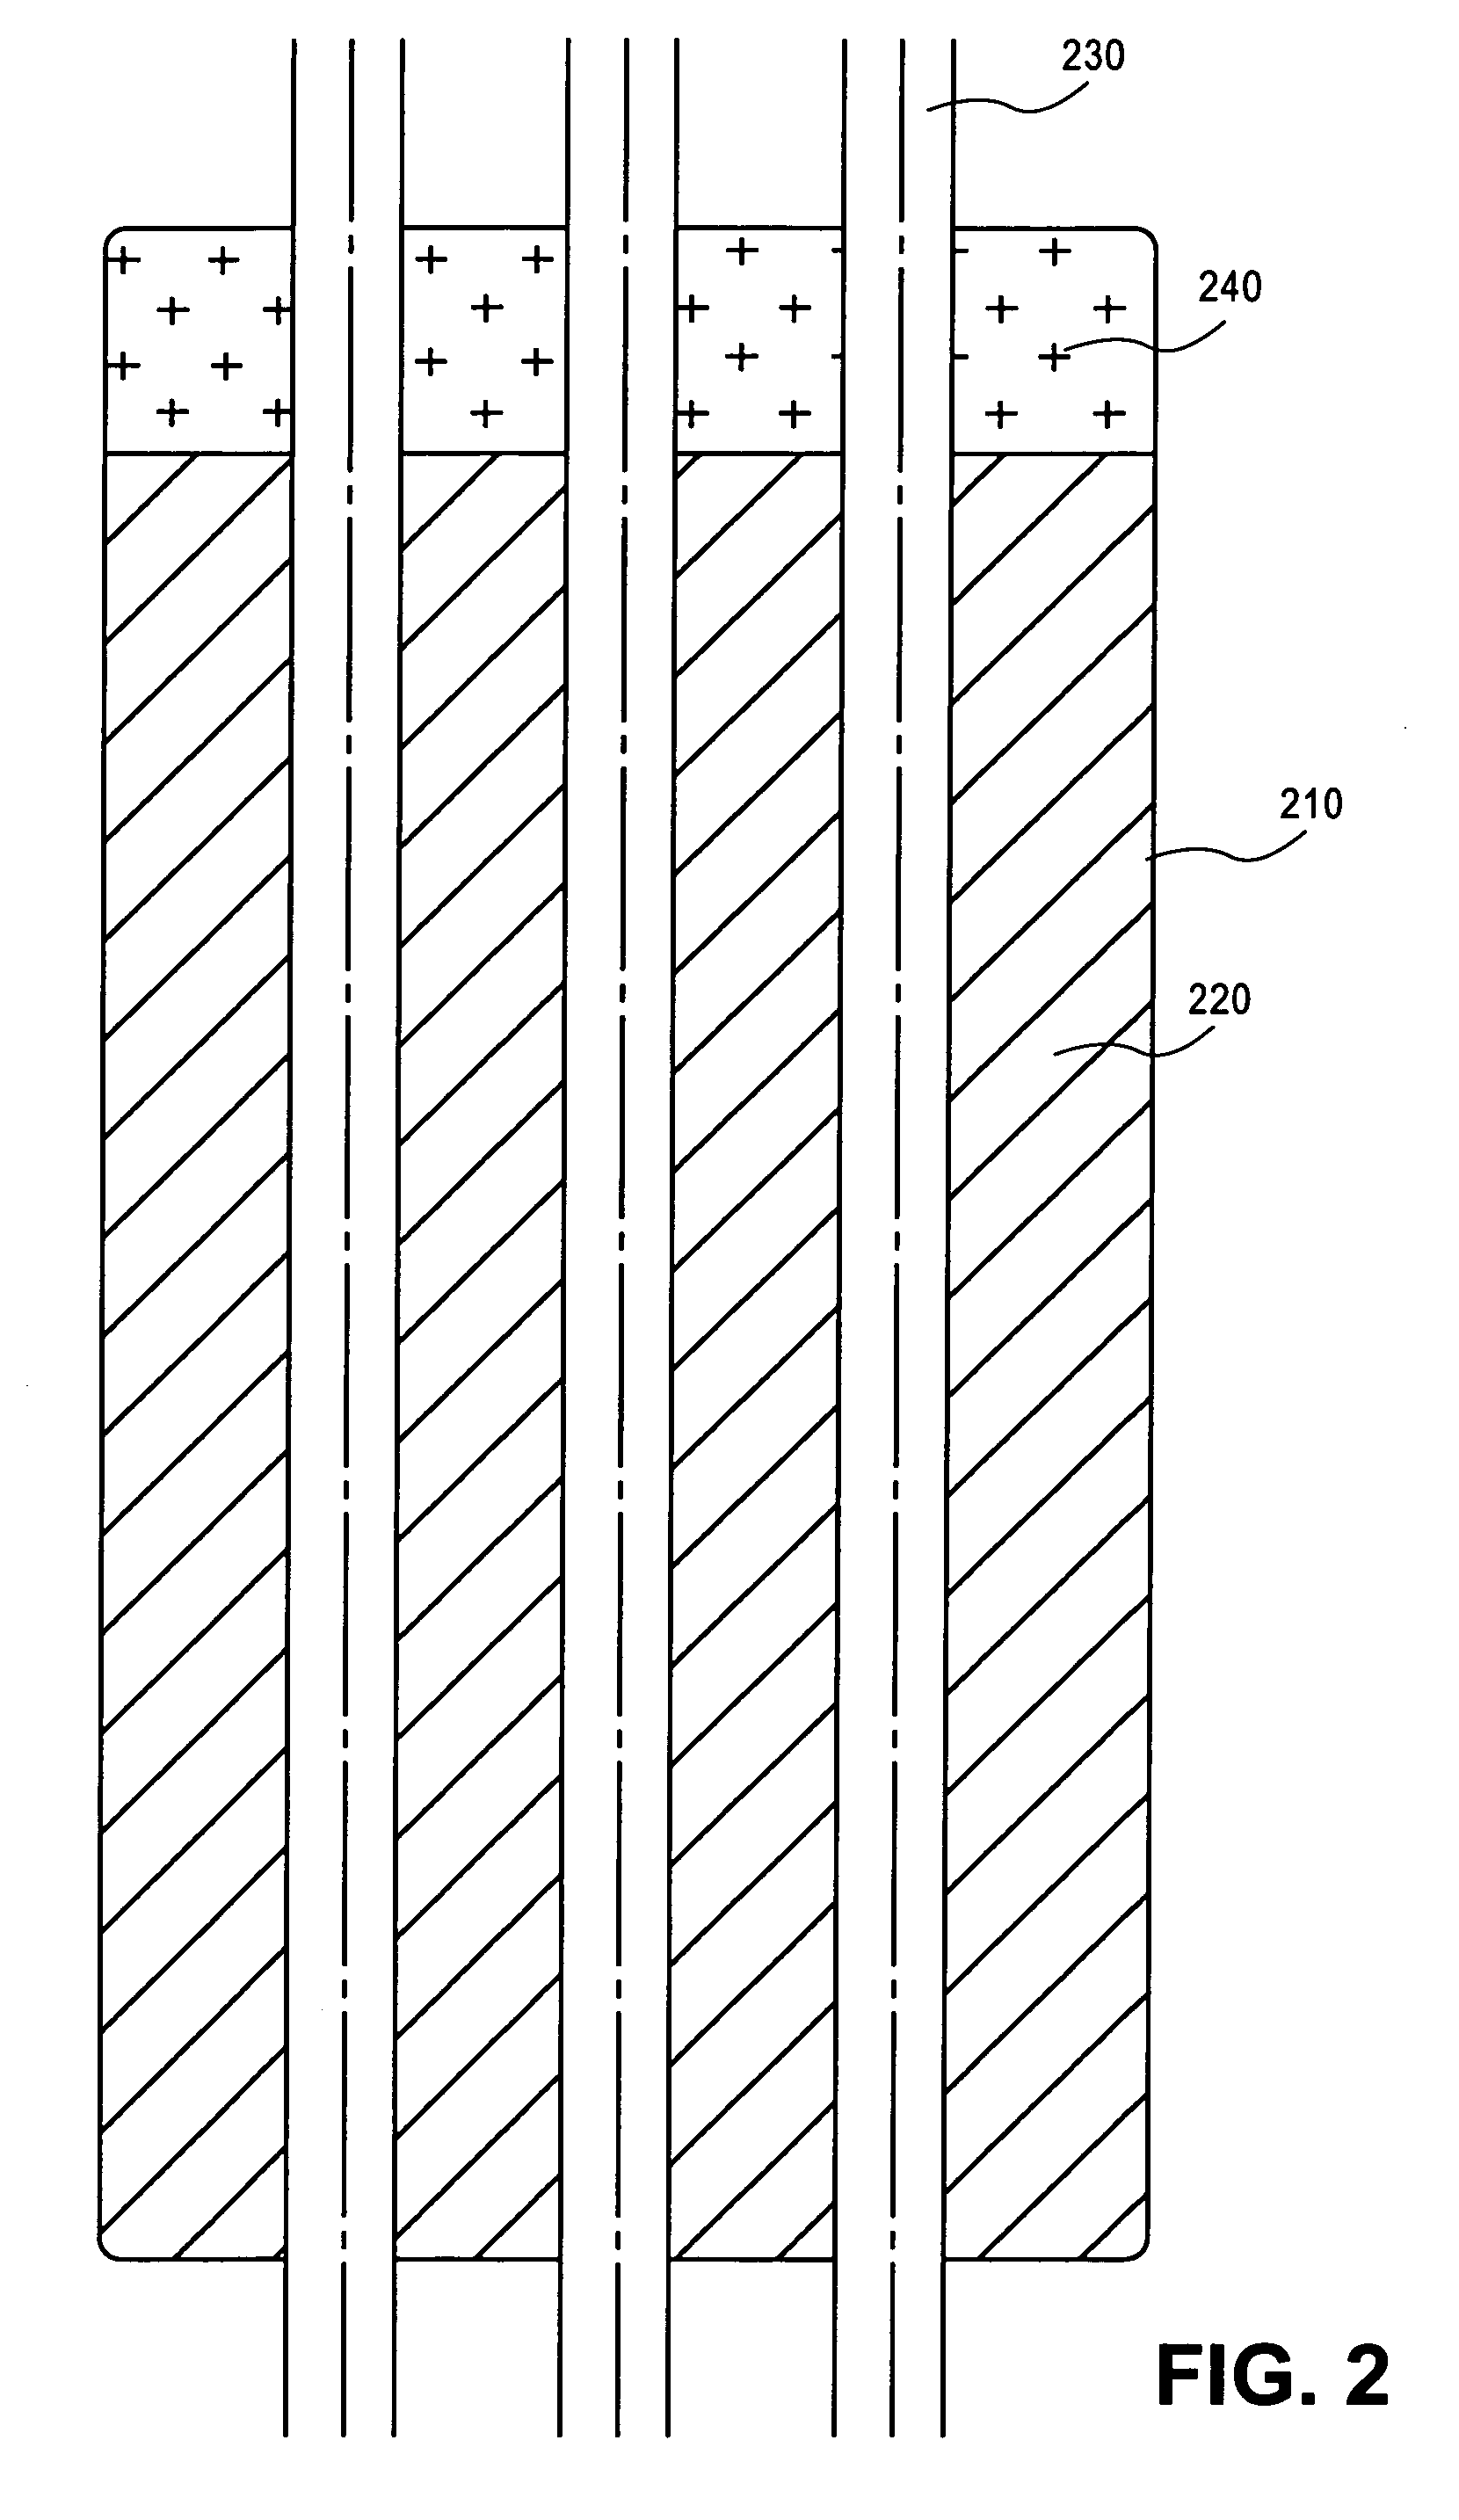 Process for manufacture of a latent heat storage device